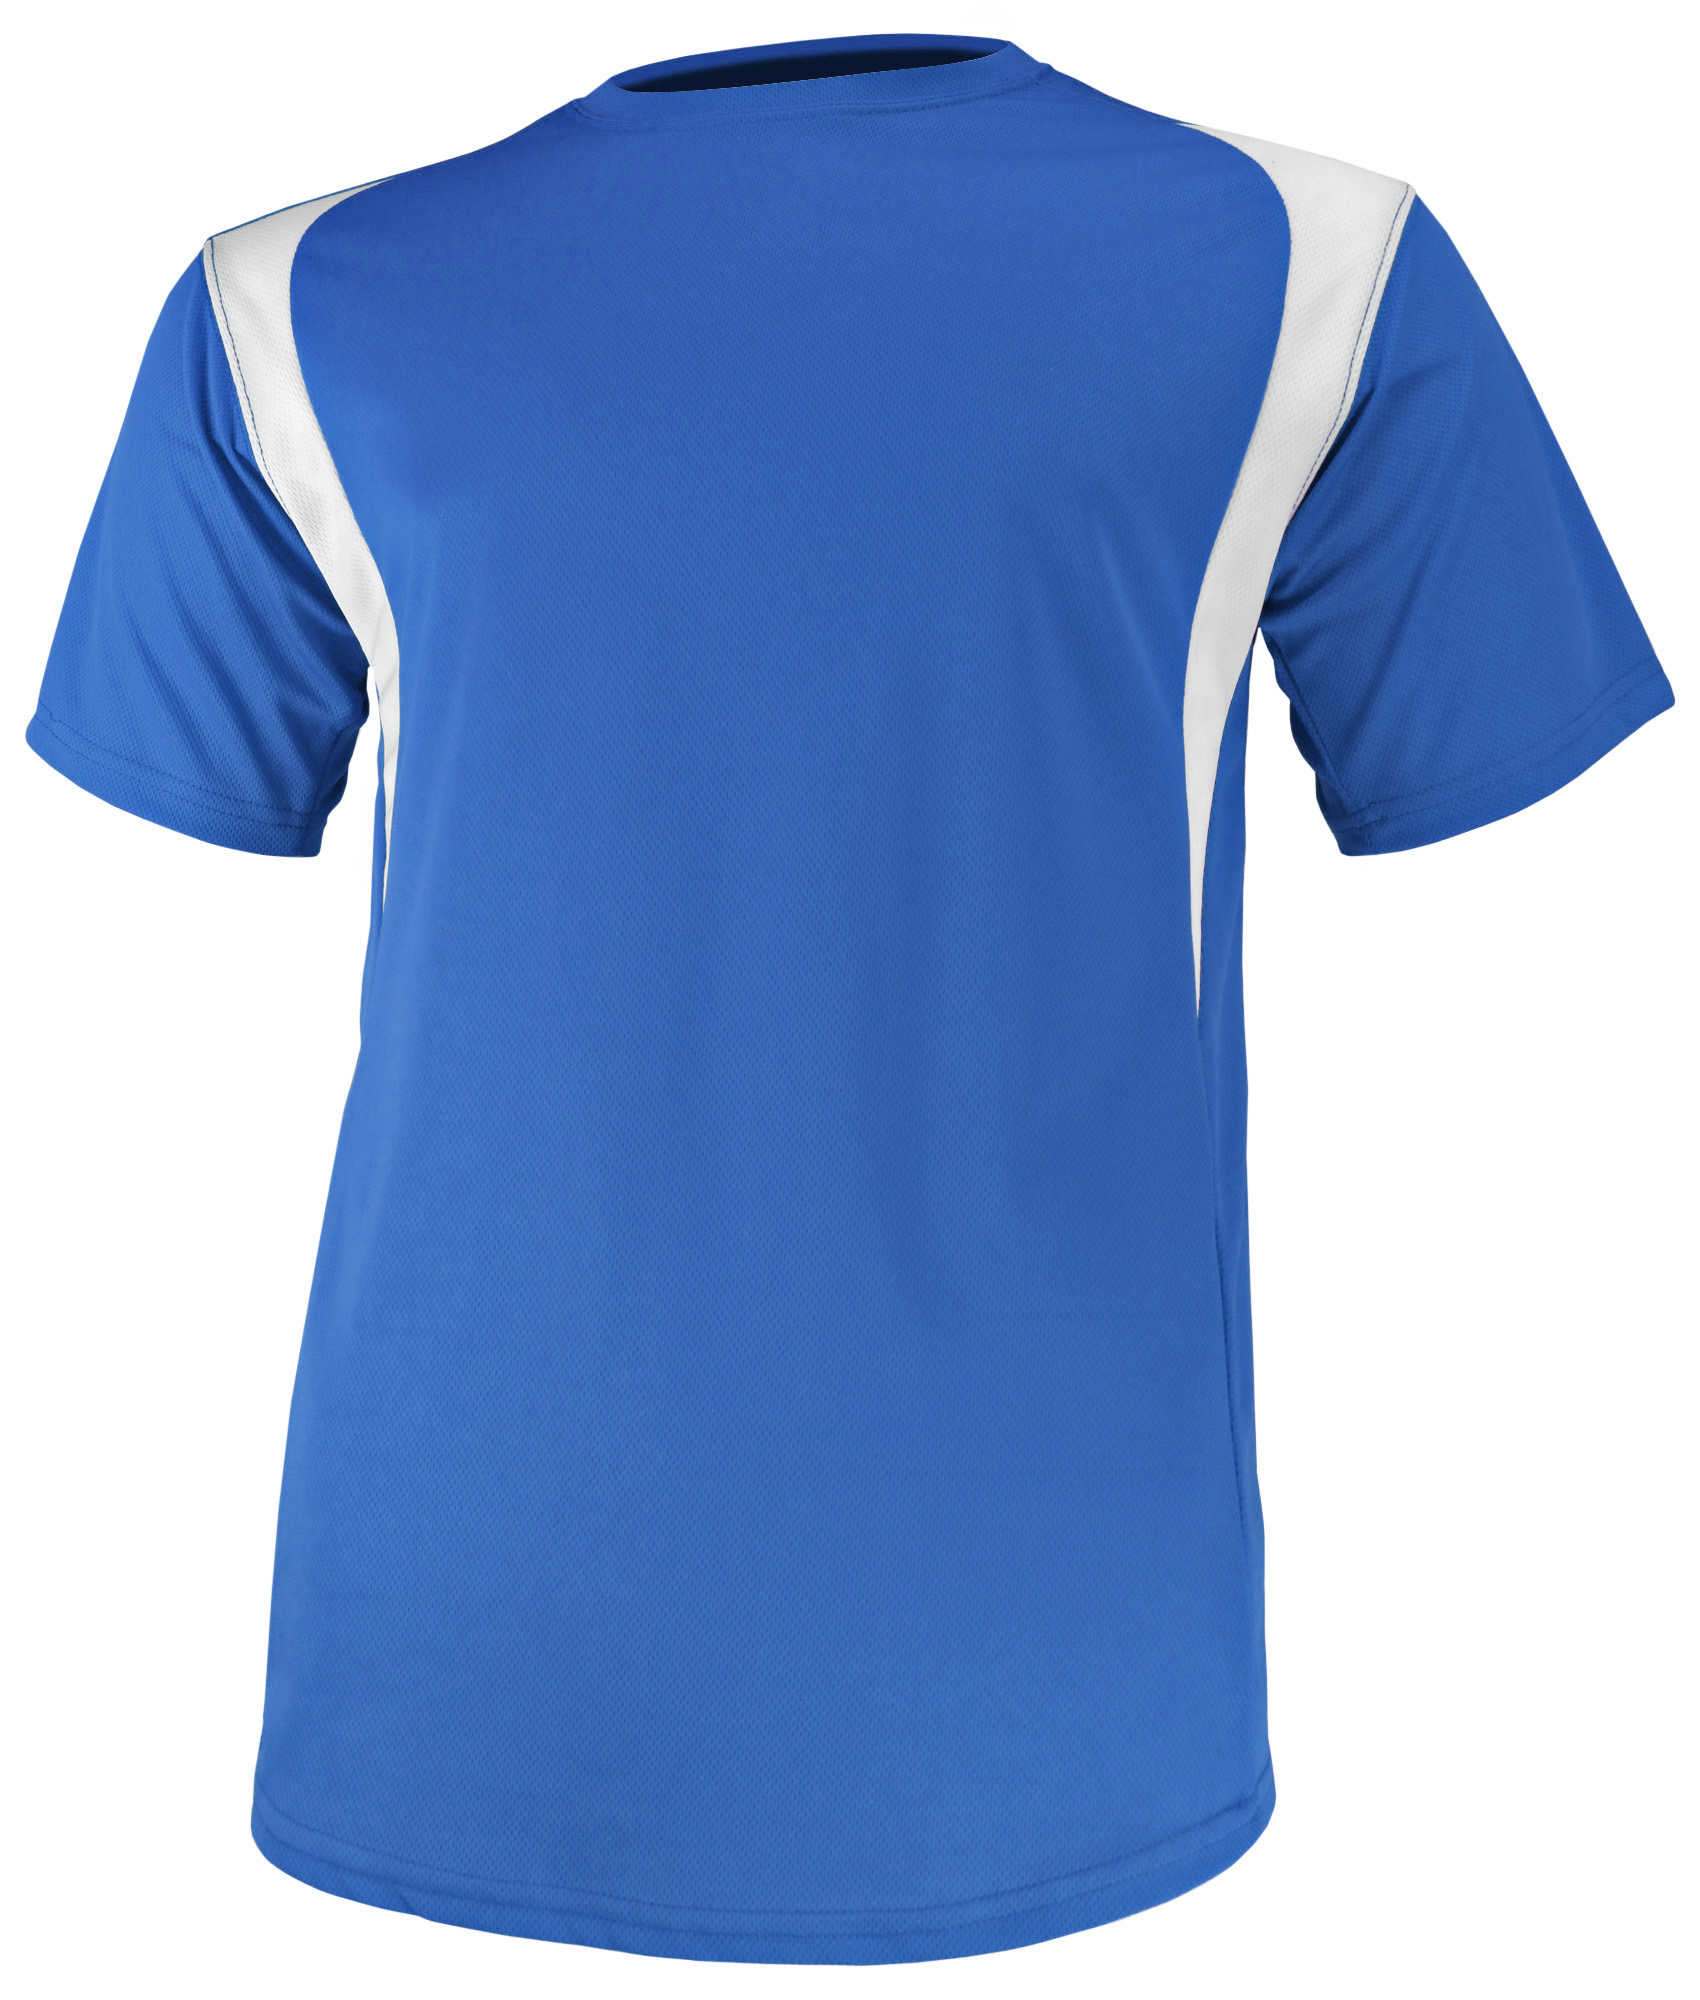 E132949 VKM Adult/Youth Mock Mesh Wicking Material Jerseys